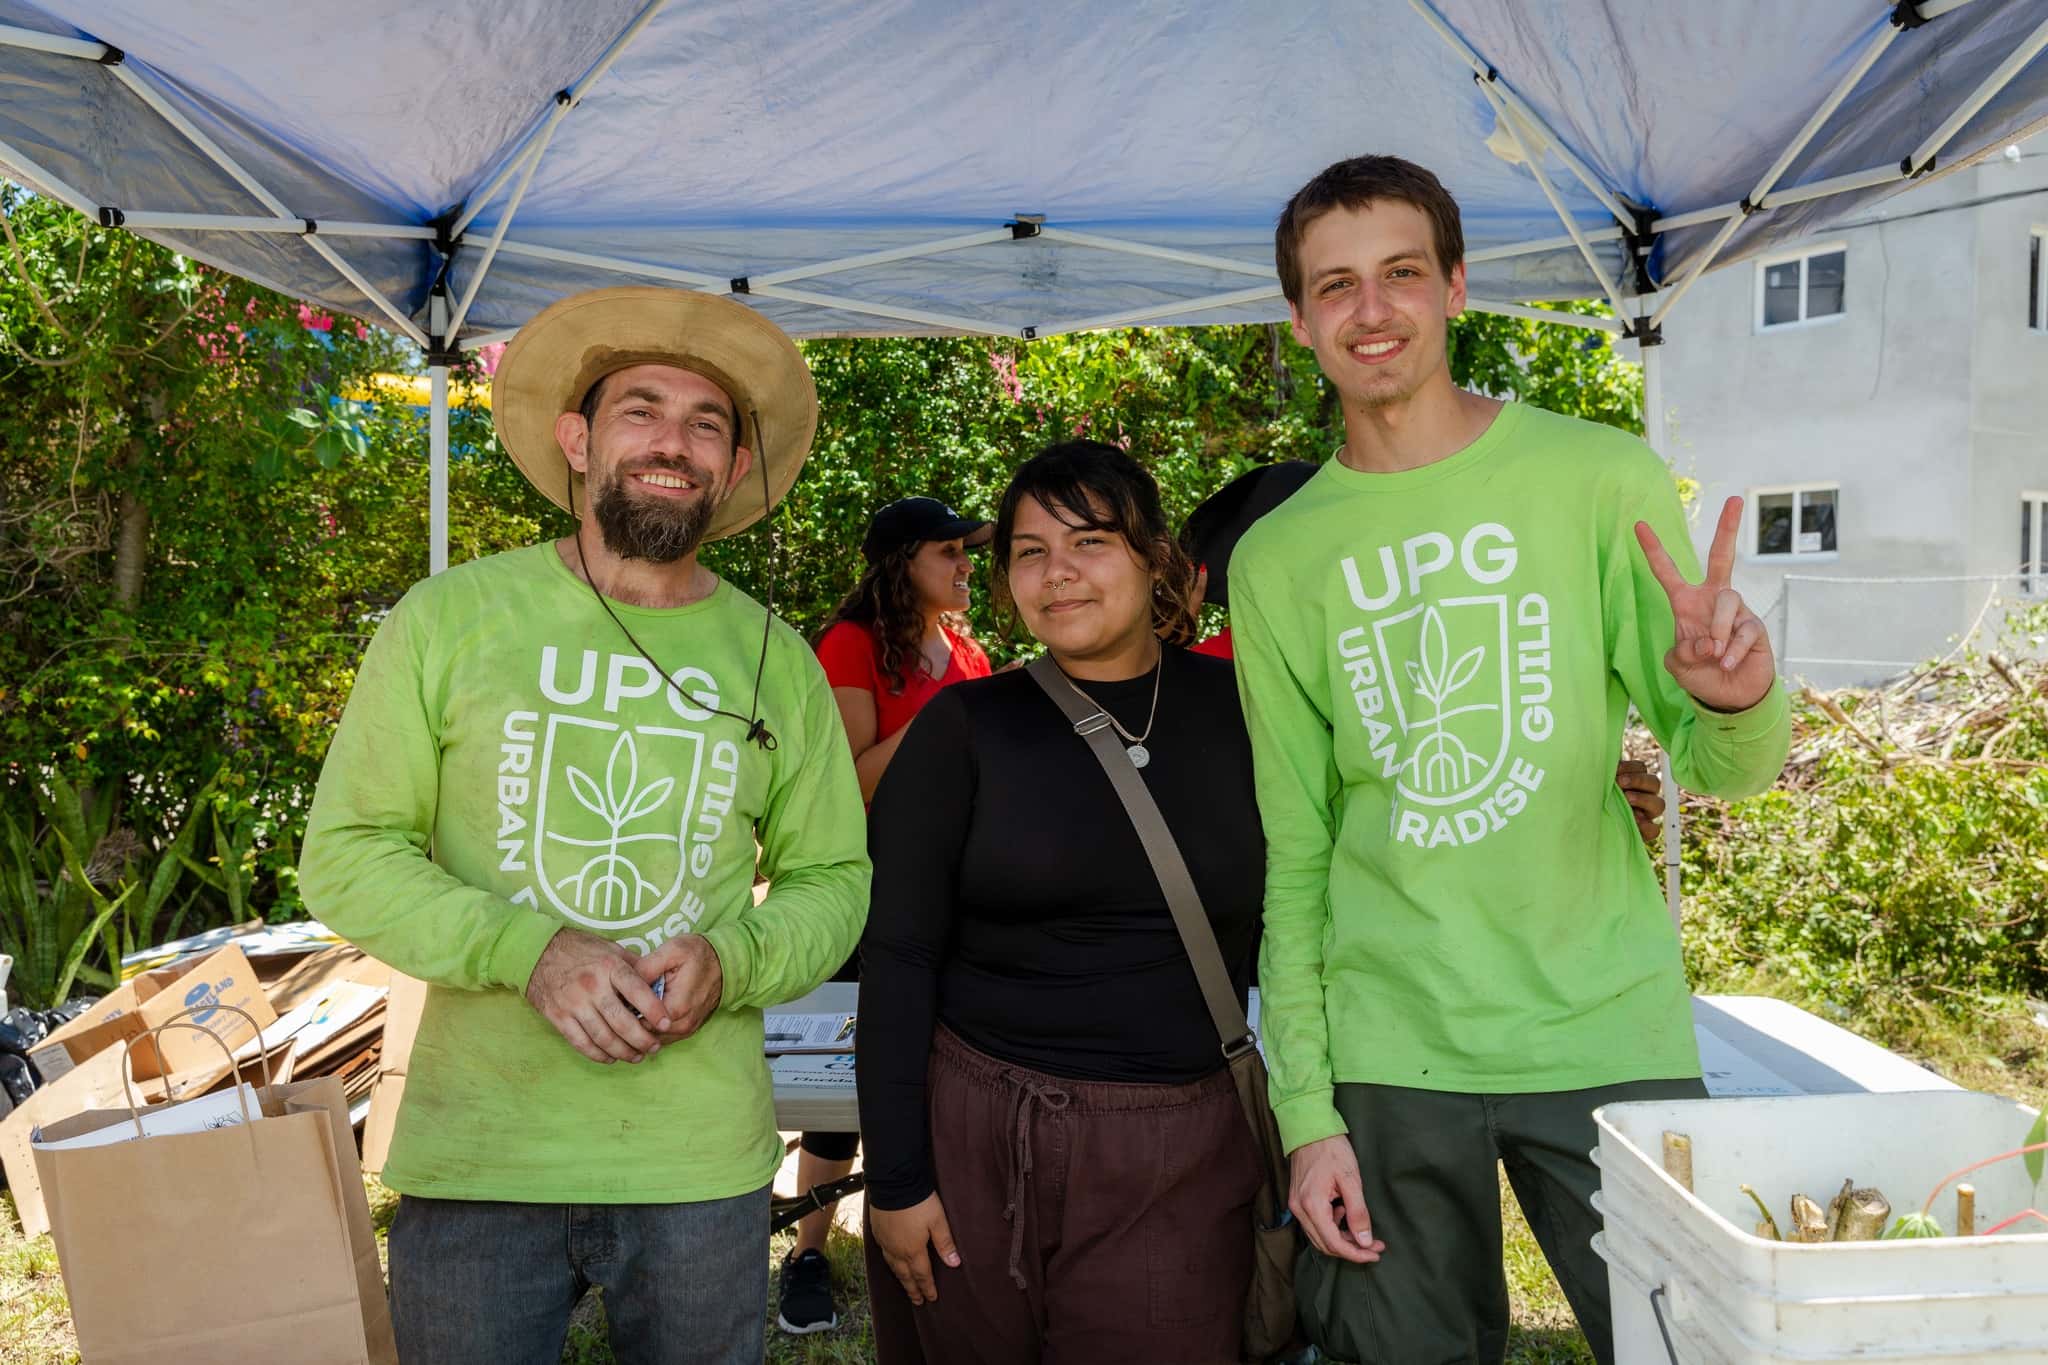 Two men in green shirts stand with a woman in a black shirt under a temporary awning